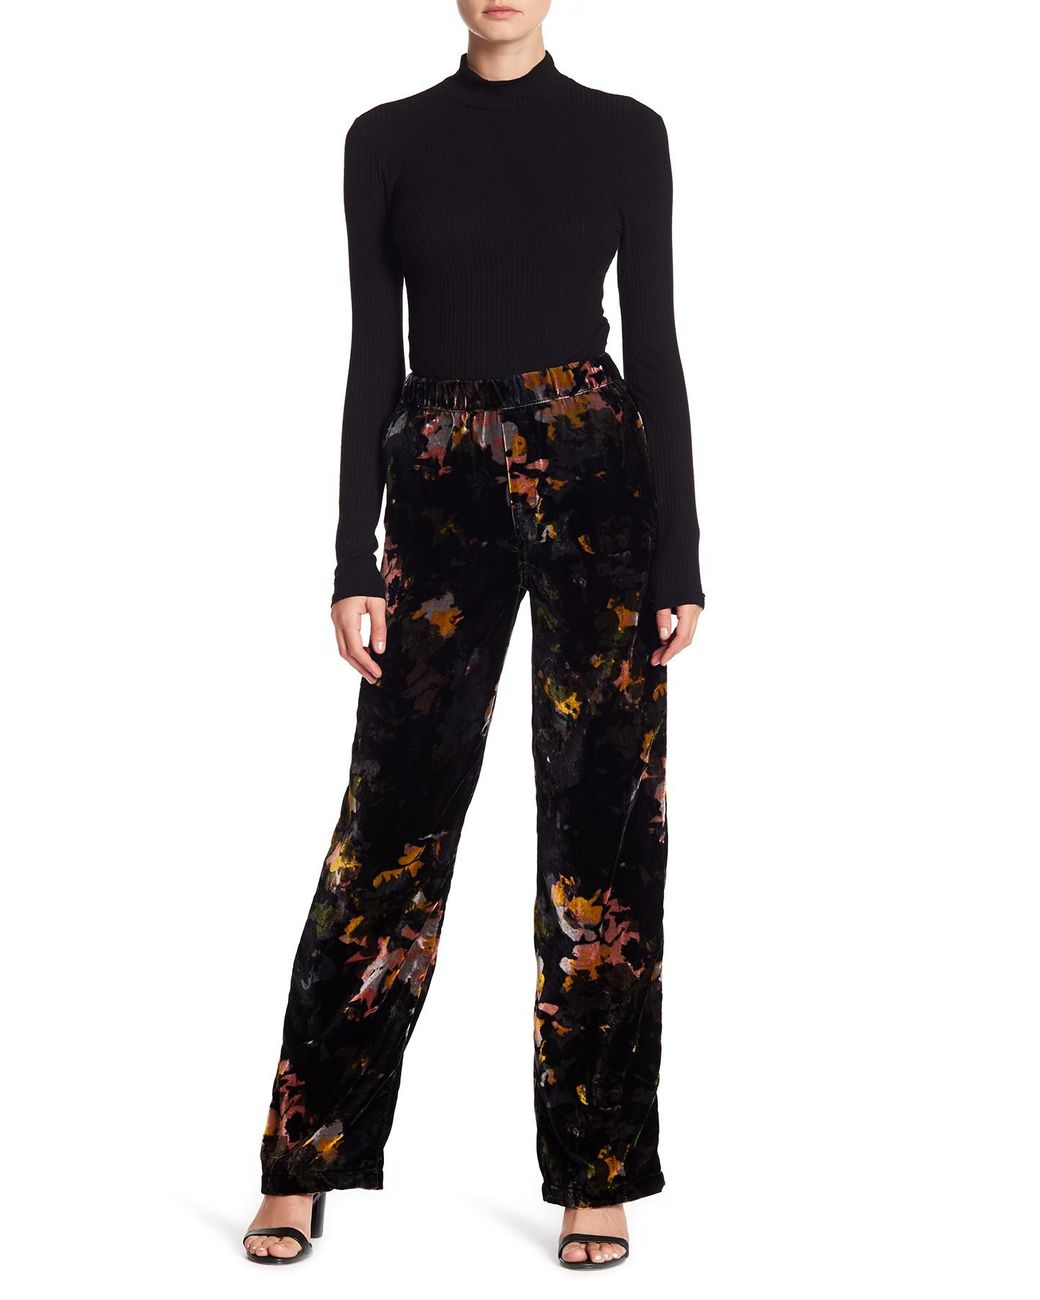 Buy Red Trousers  Pants for Women by Glamorous Online  Ajiocom